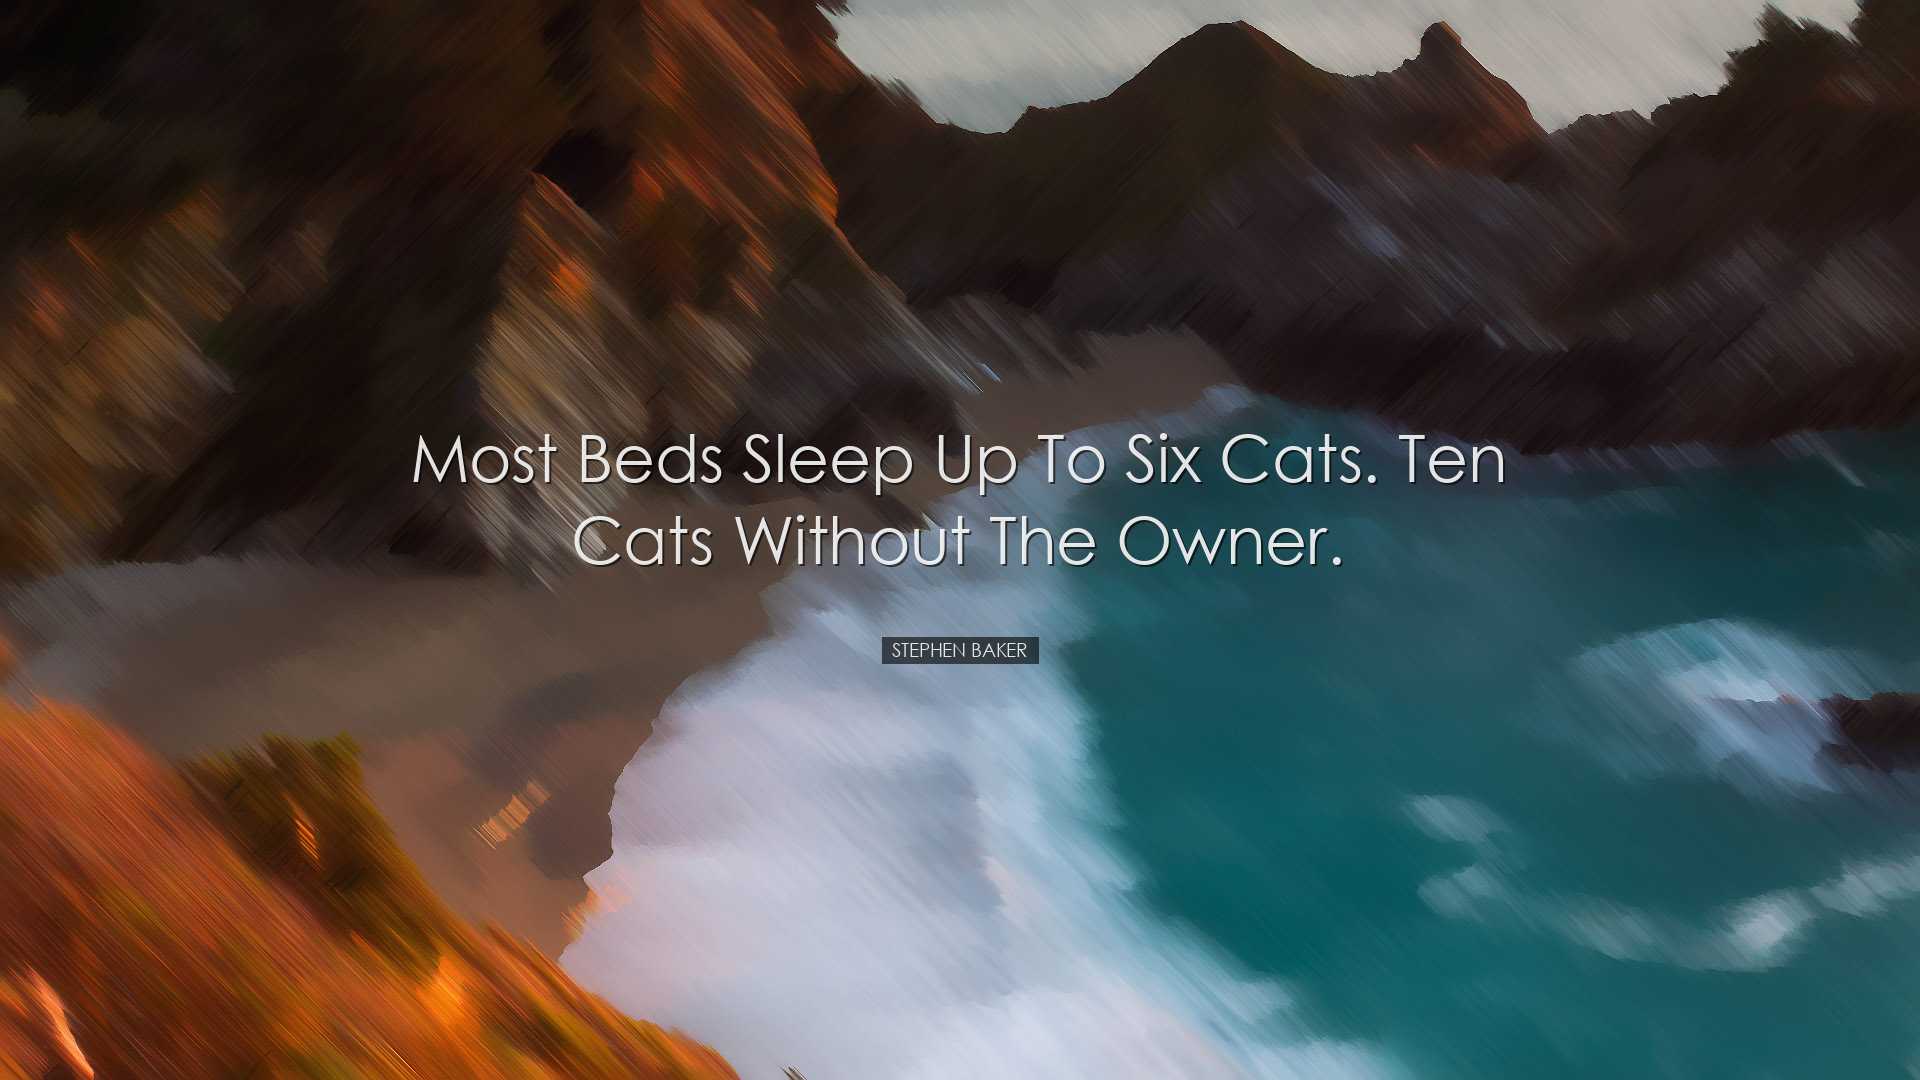 Most beds sleep up to six cats. Ten cats without the owner. - Step